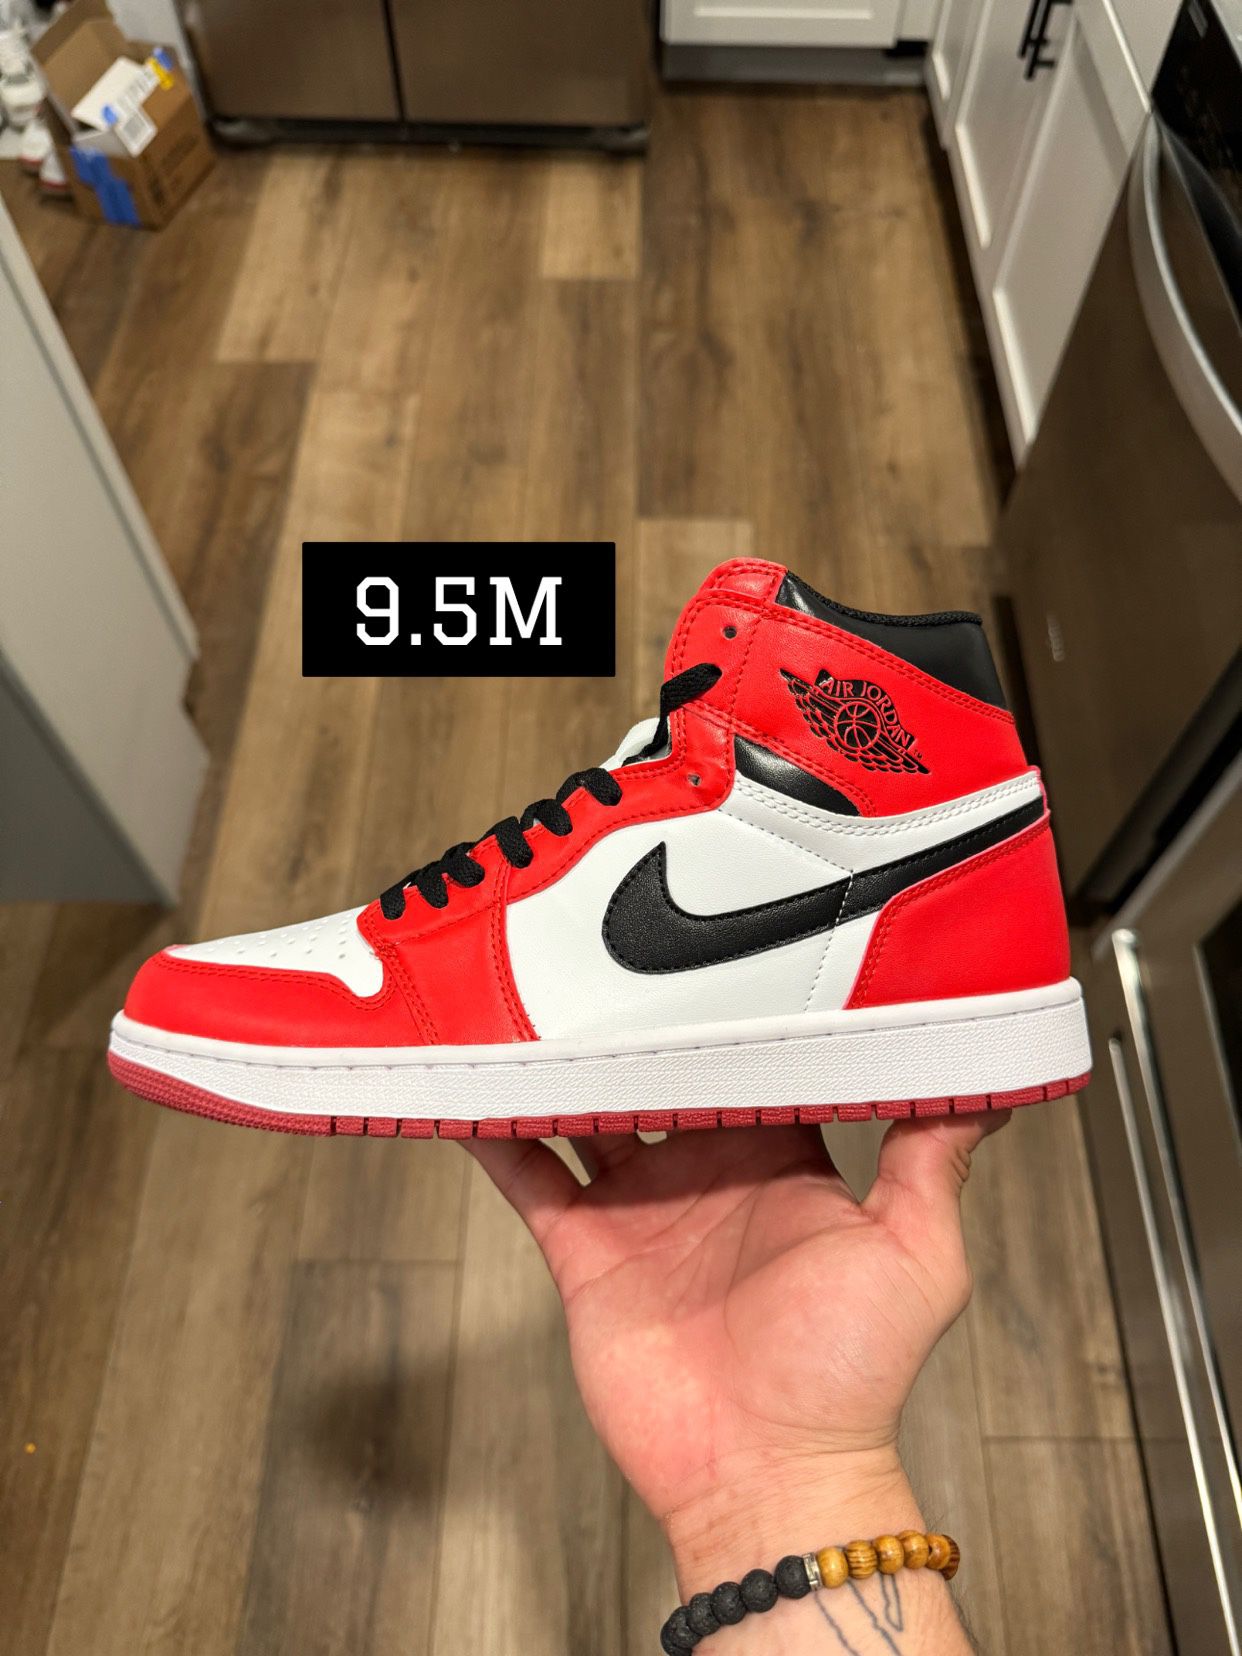 Jordan 1 ‘ Chicago’, 9.5M (check out my page🔥) 